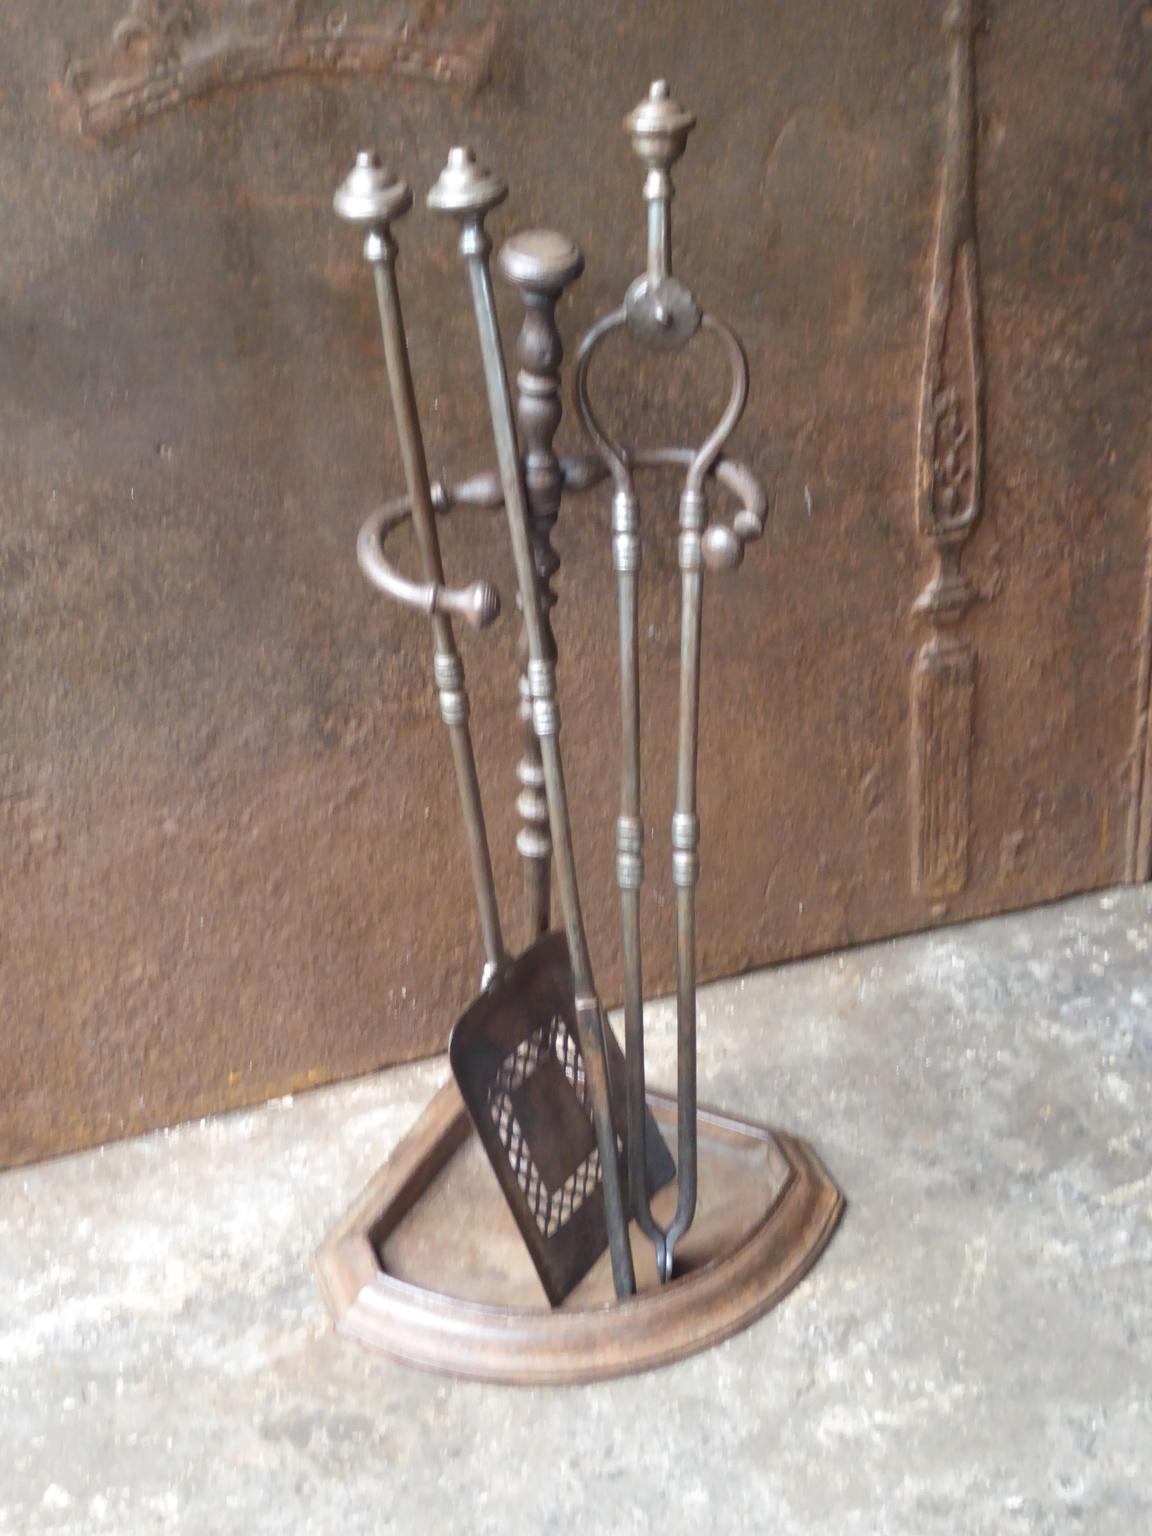 Forged English Set of Fireplace Tools, Victorian Companion Set, 19th Century